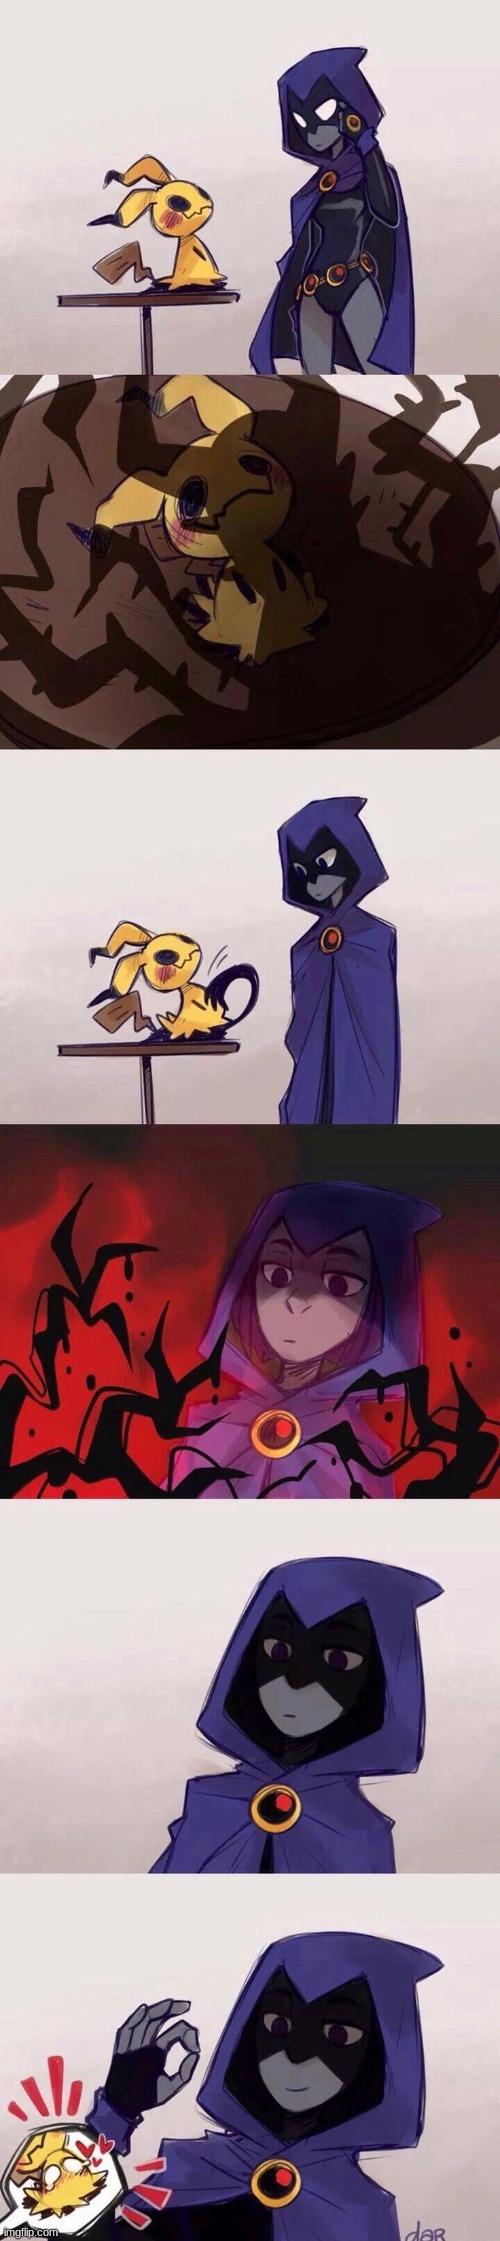 Under the hoods (Art by Dar Draws) | image tagged in teen titans,pokemon,raven,mimikyu,crossover | made w/ Imgflip meme maker